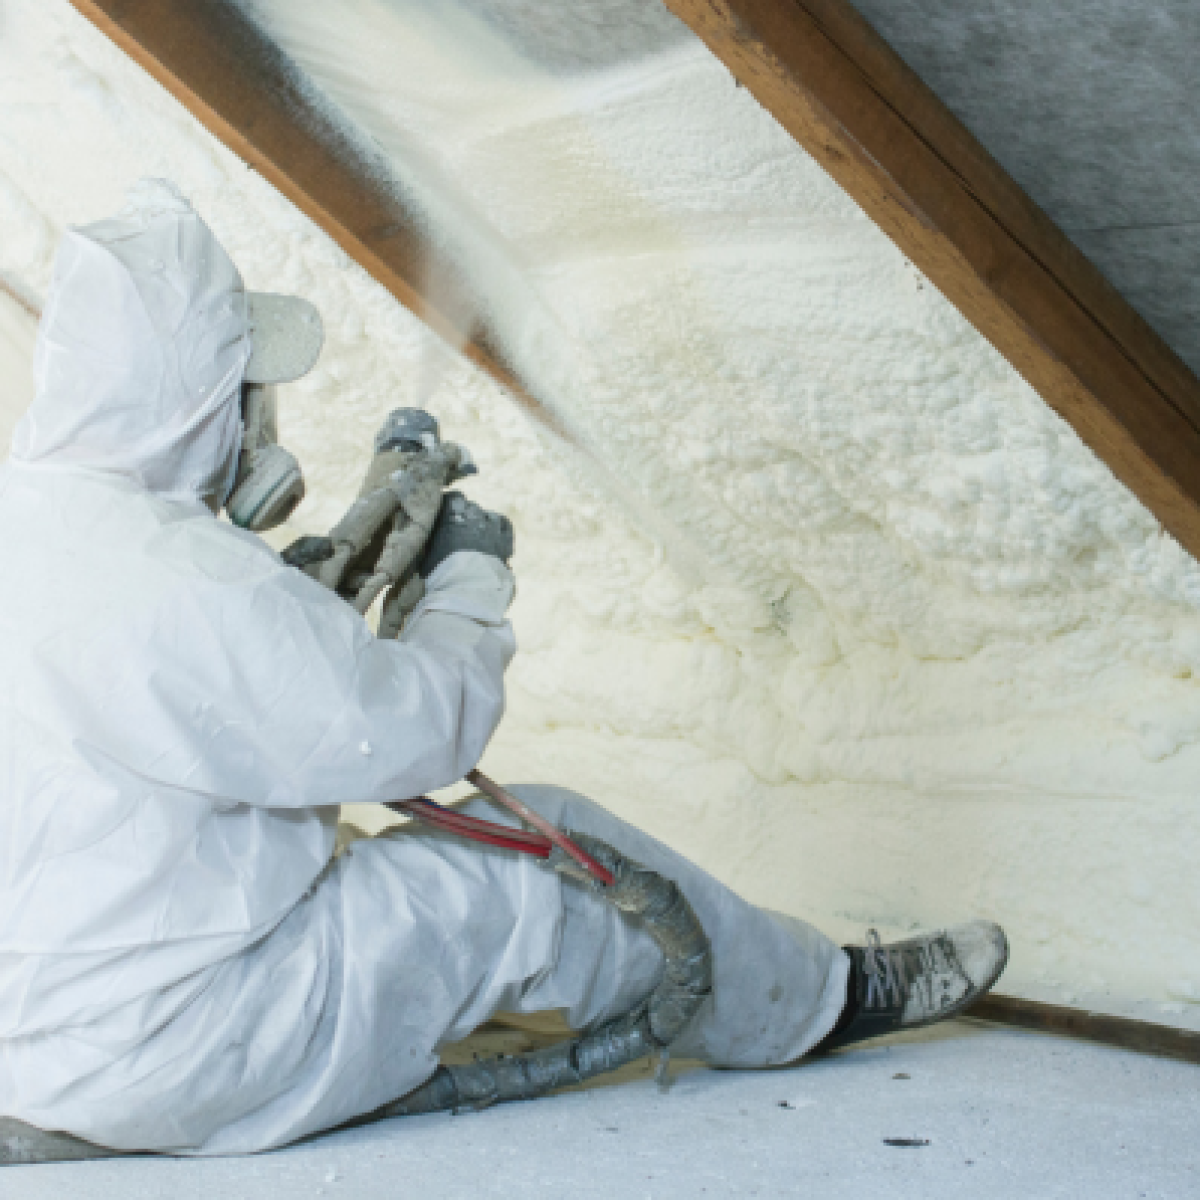 Should I use spray foam insulation in my home?